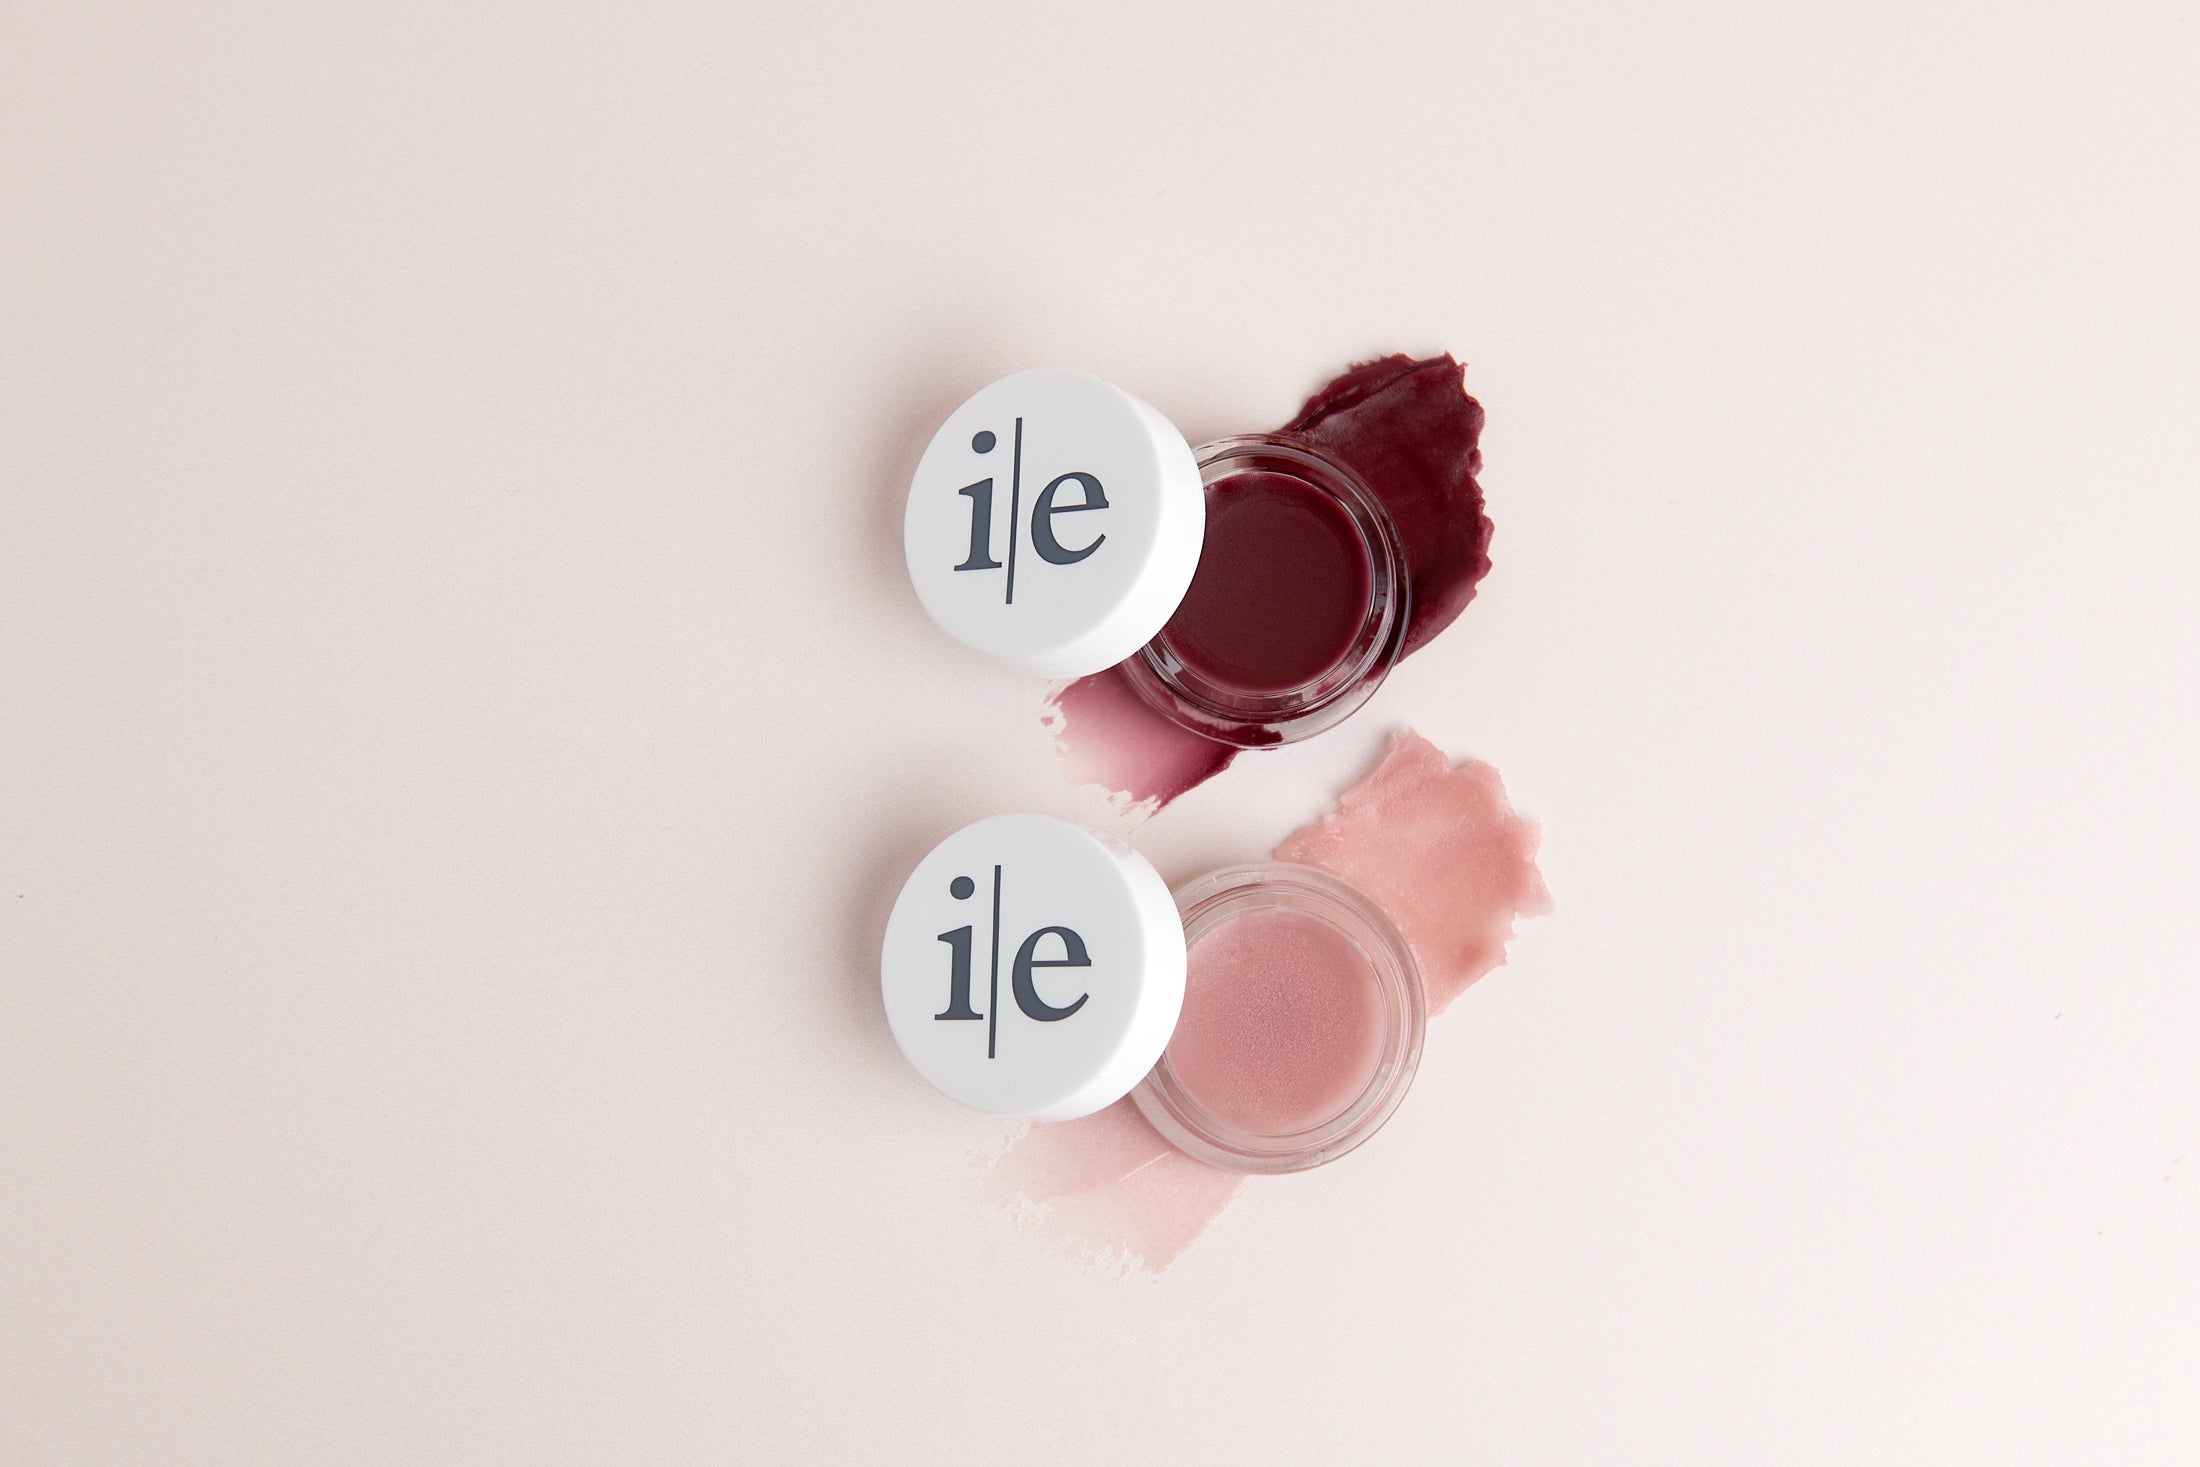 Two Lip Elixir lips balms in color sheer and plum